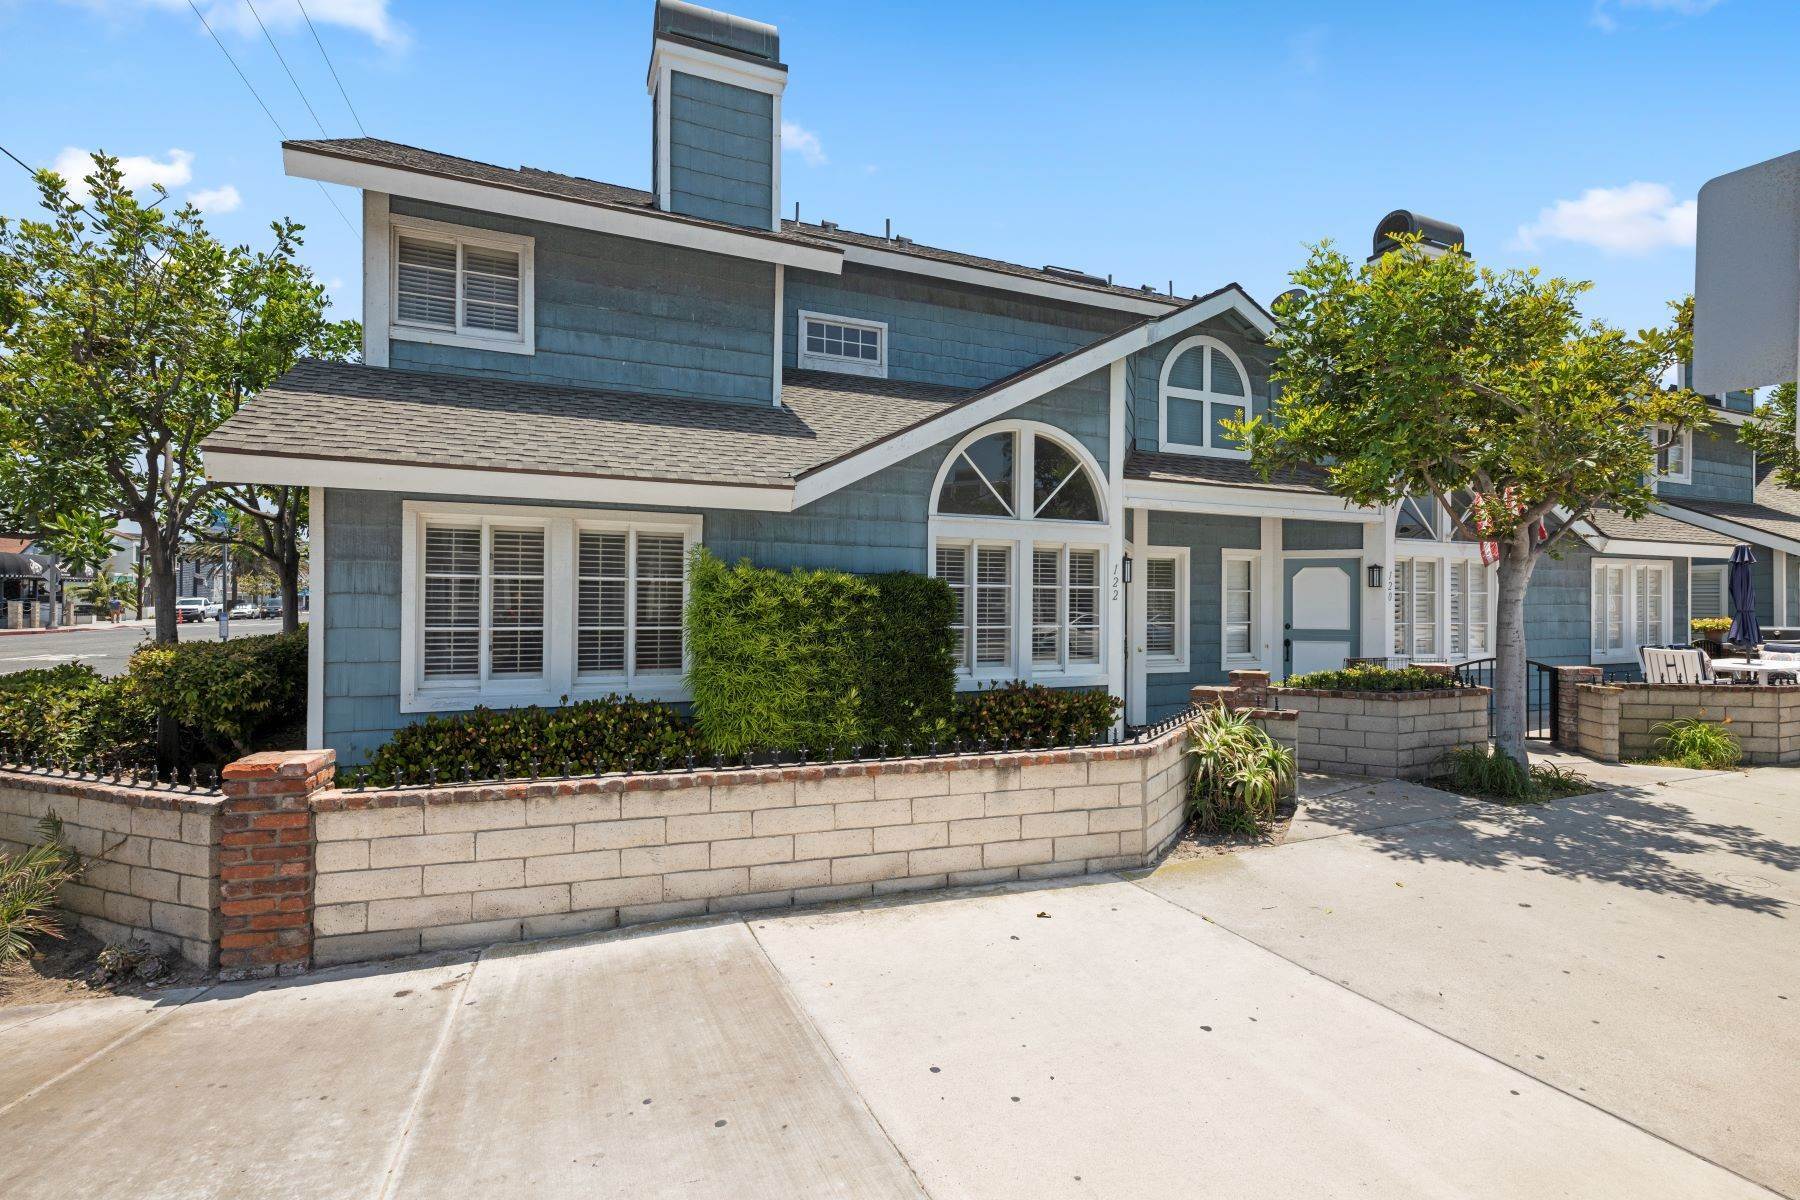 Townhouse for Sale at 122 32nd Street, Newport Beach, CA 92663 122 32nd Street Newport Beach, California 92663 United States